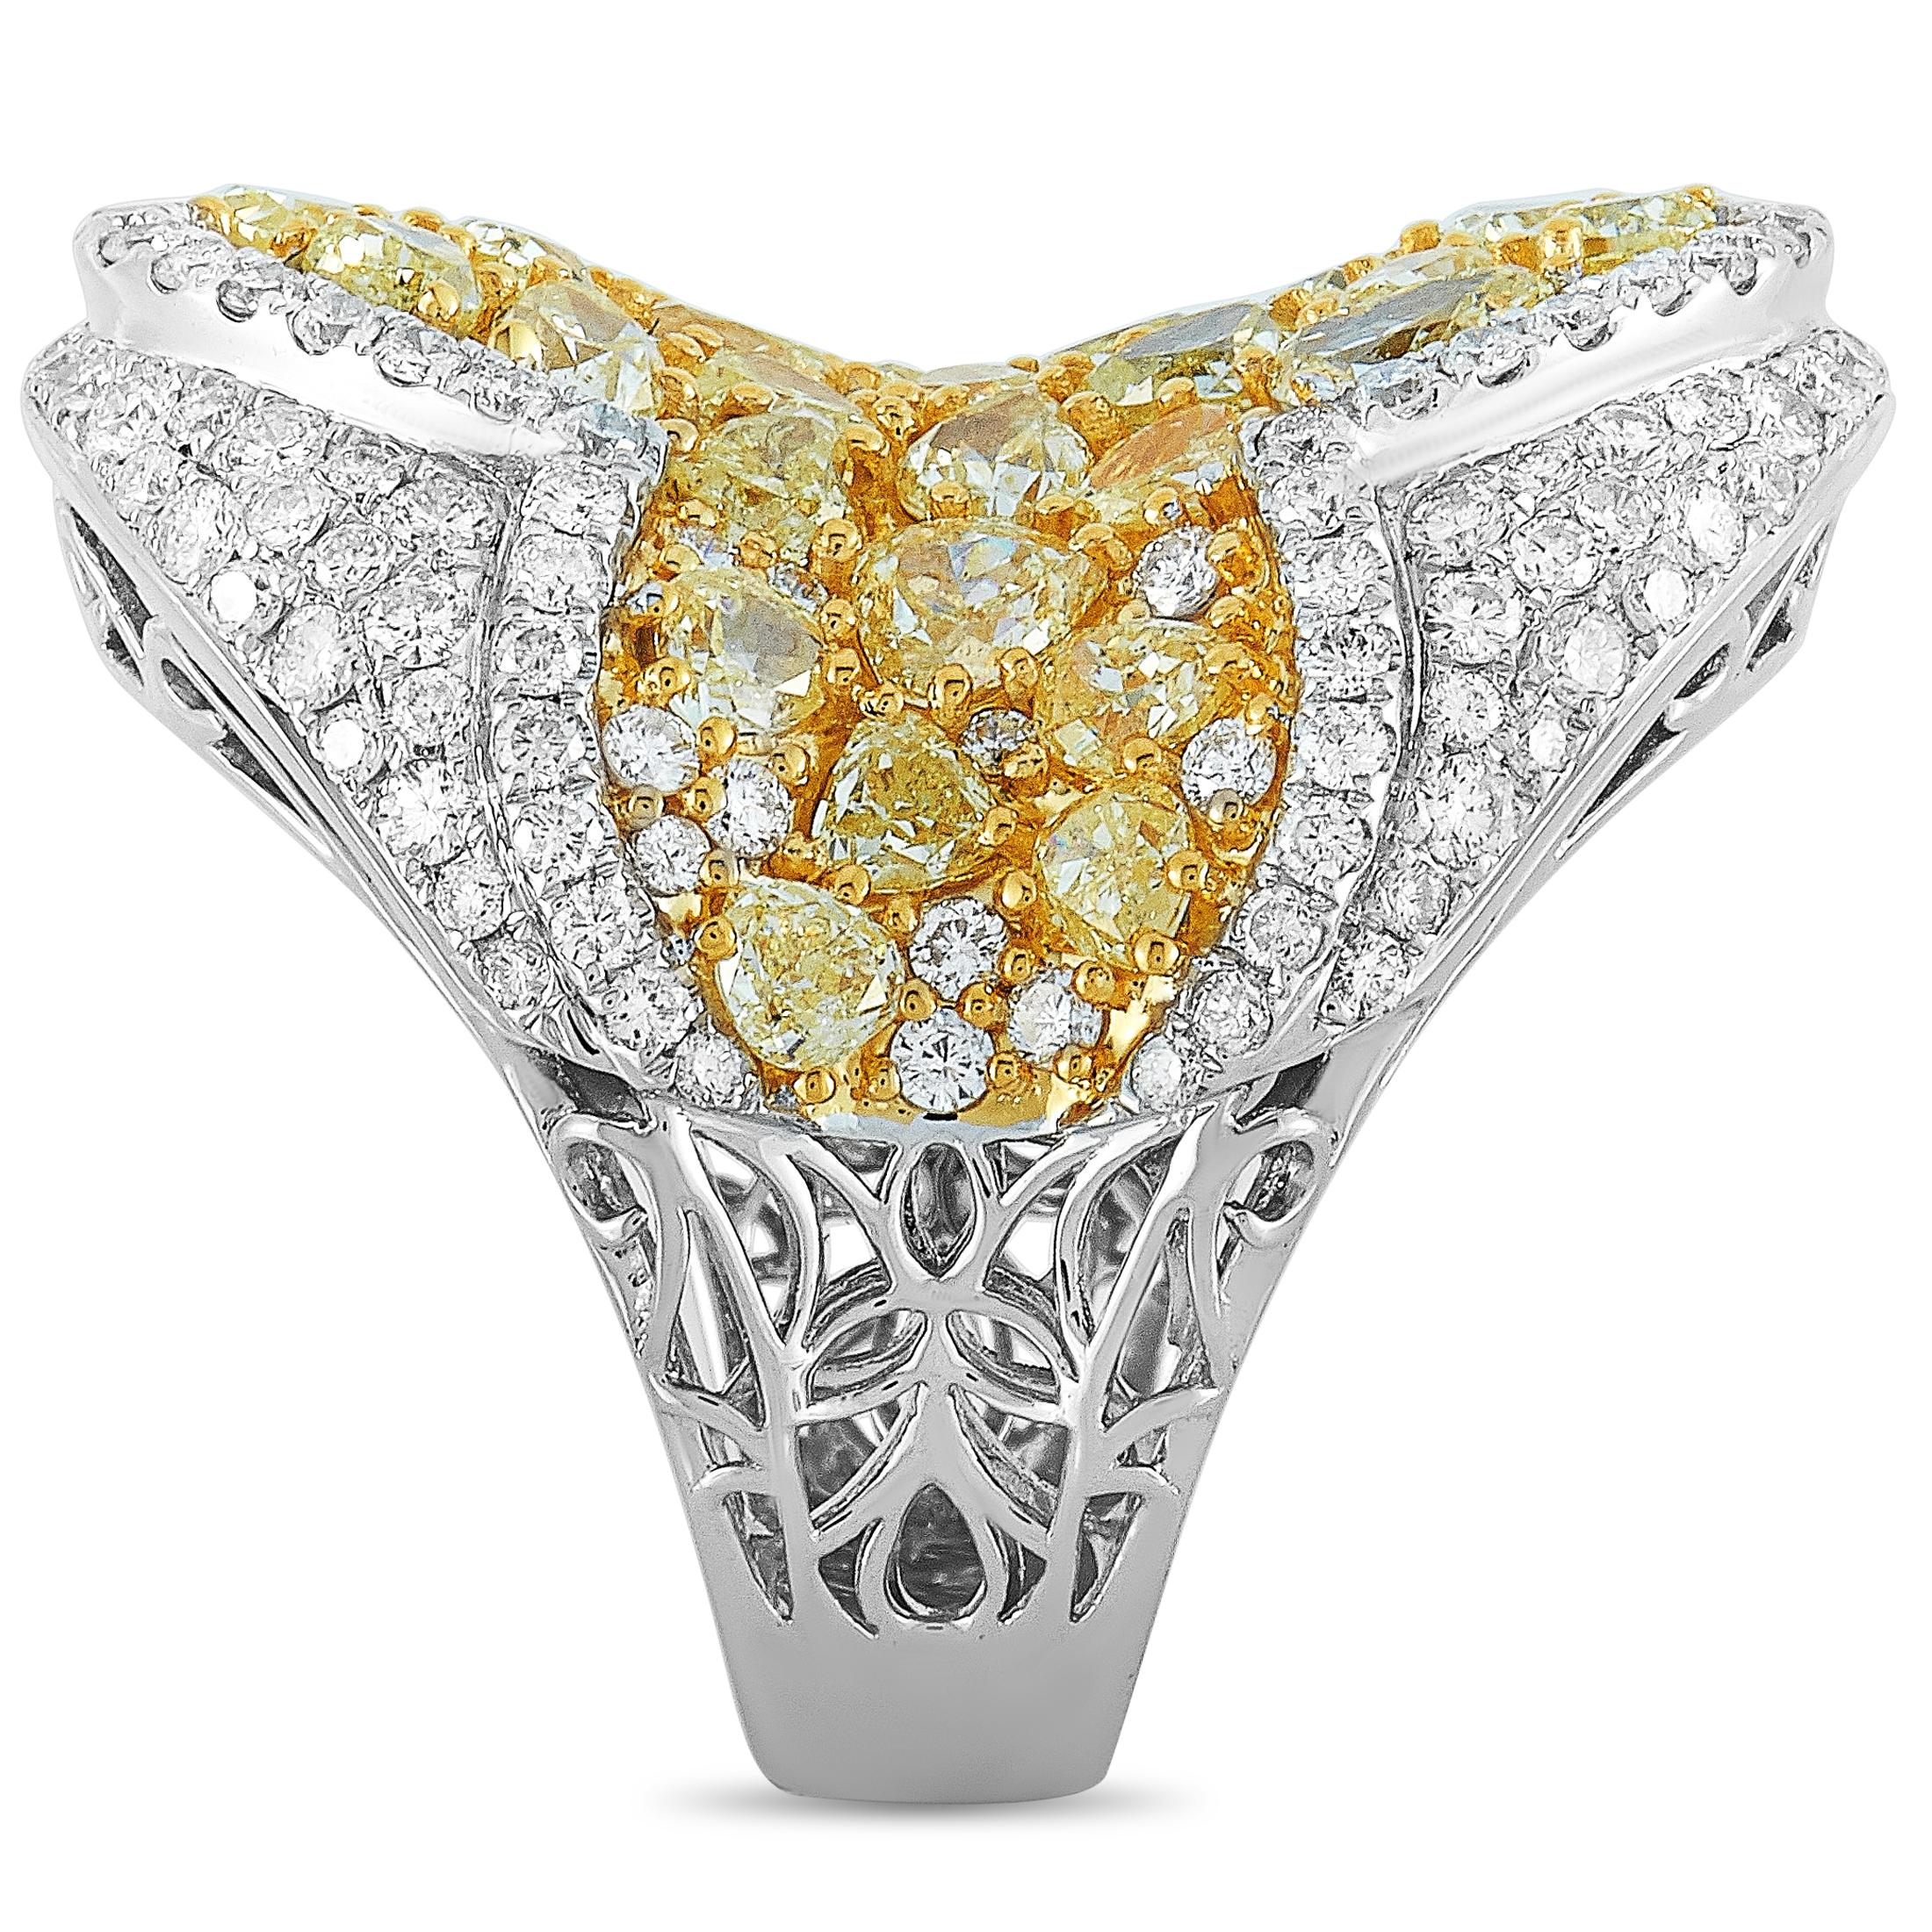 This LB Exclusive ring is crafted from 18K white gold and set with white and yellow diamonds that total 2.06 and 5.03 carats respectively. The ring weighs 18.3 grams and boasts band thickness of 5 mm and top height of 8 mm, while top dimensions